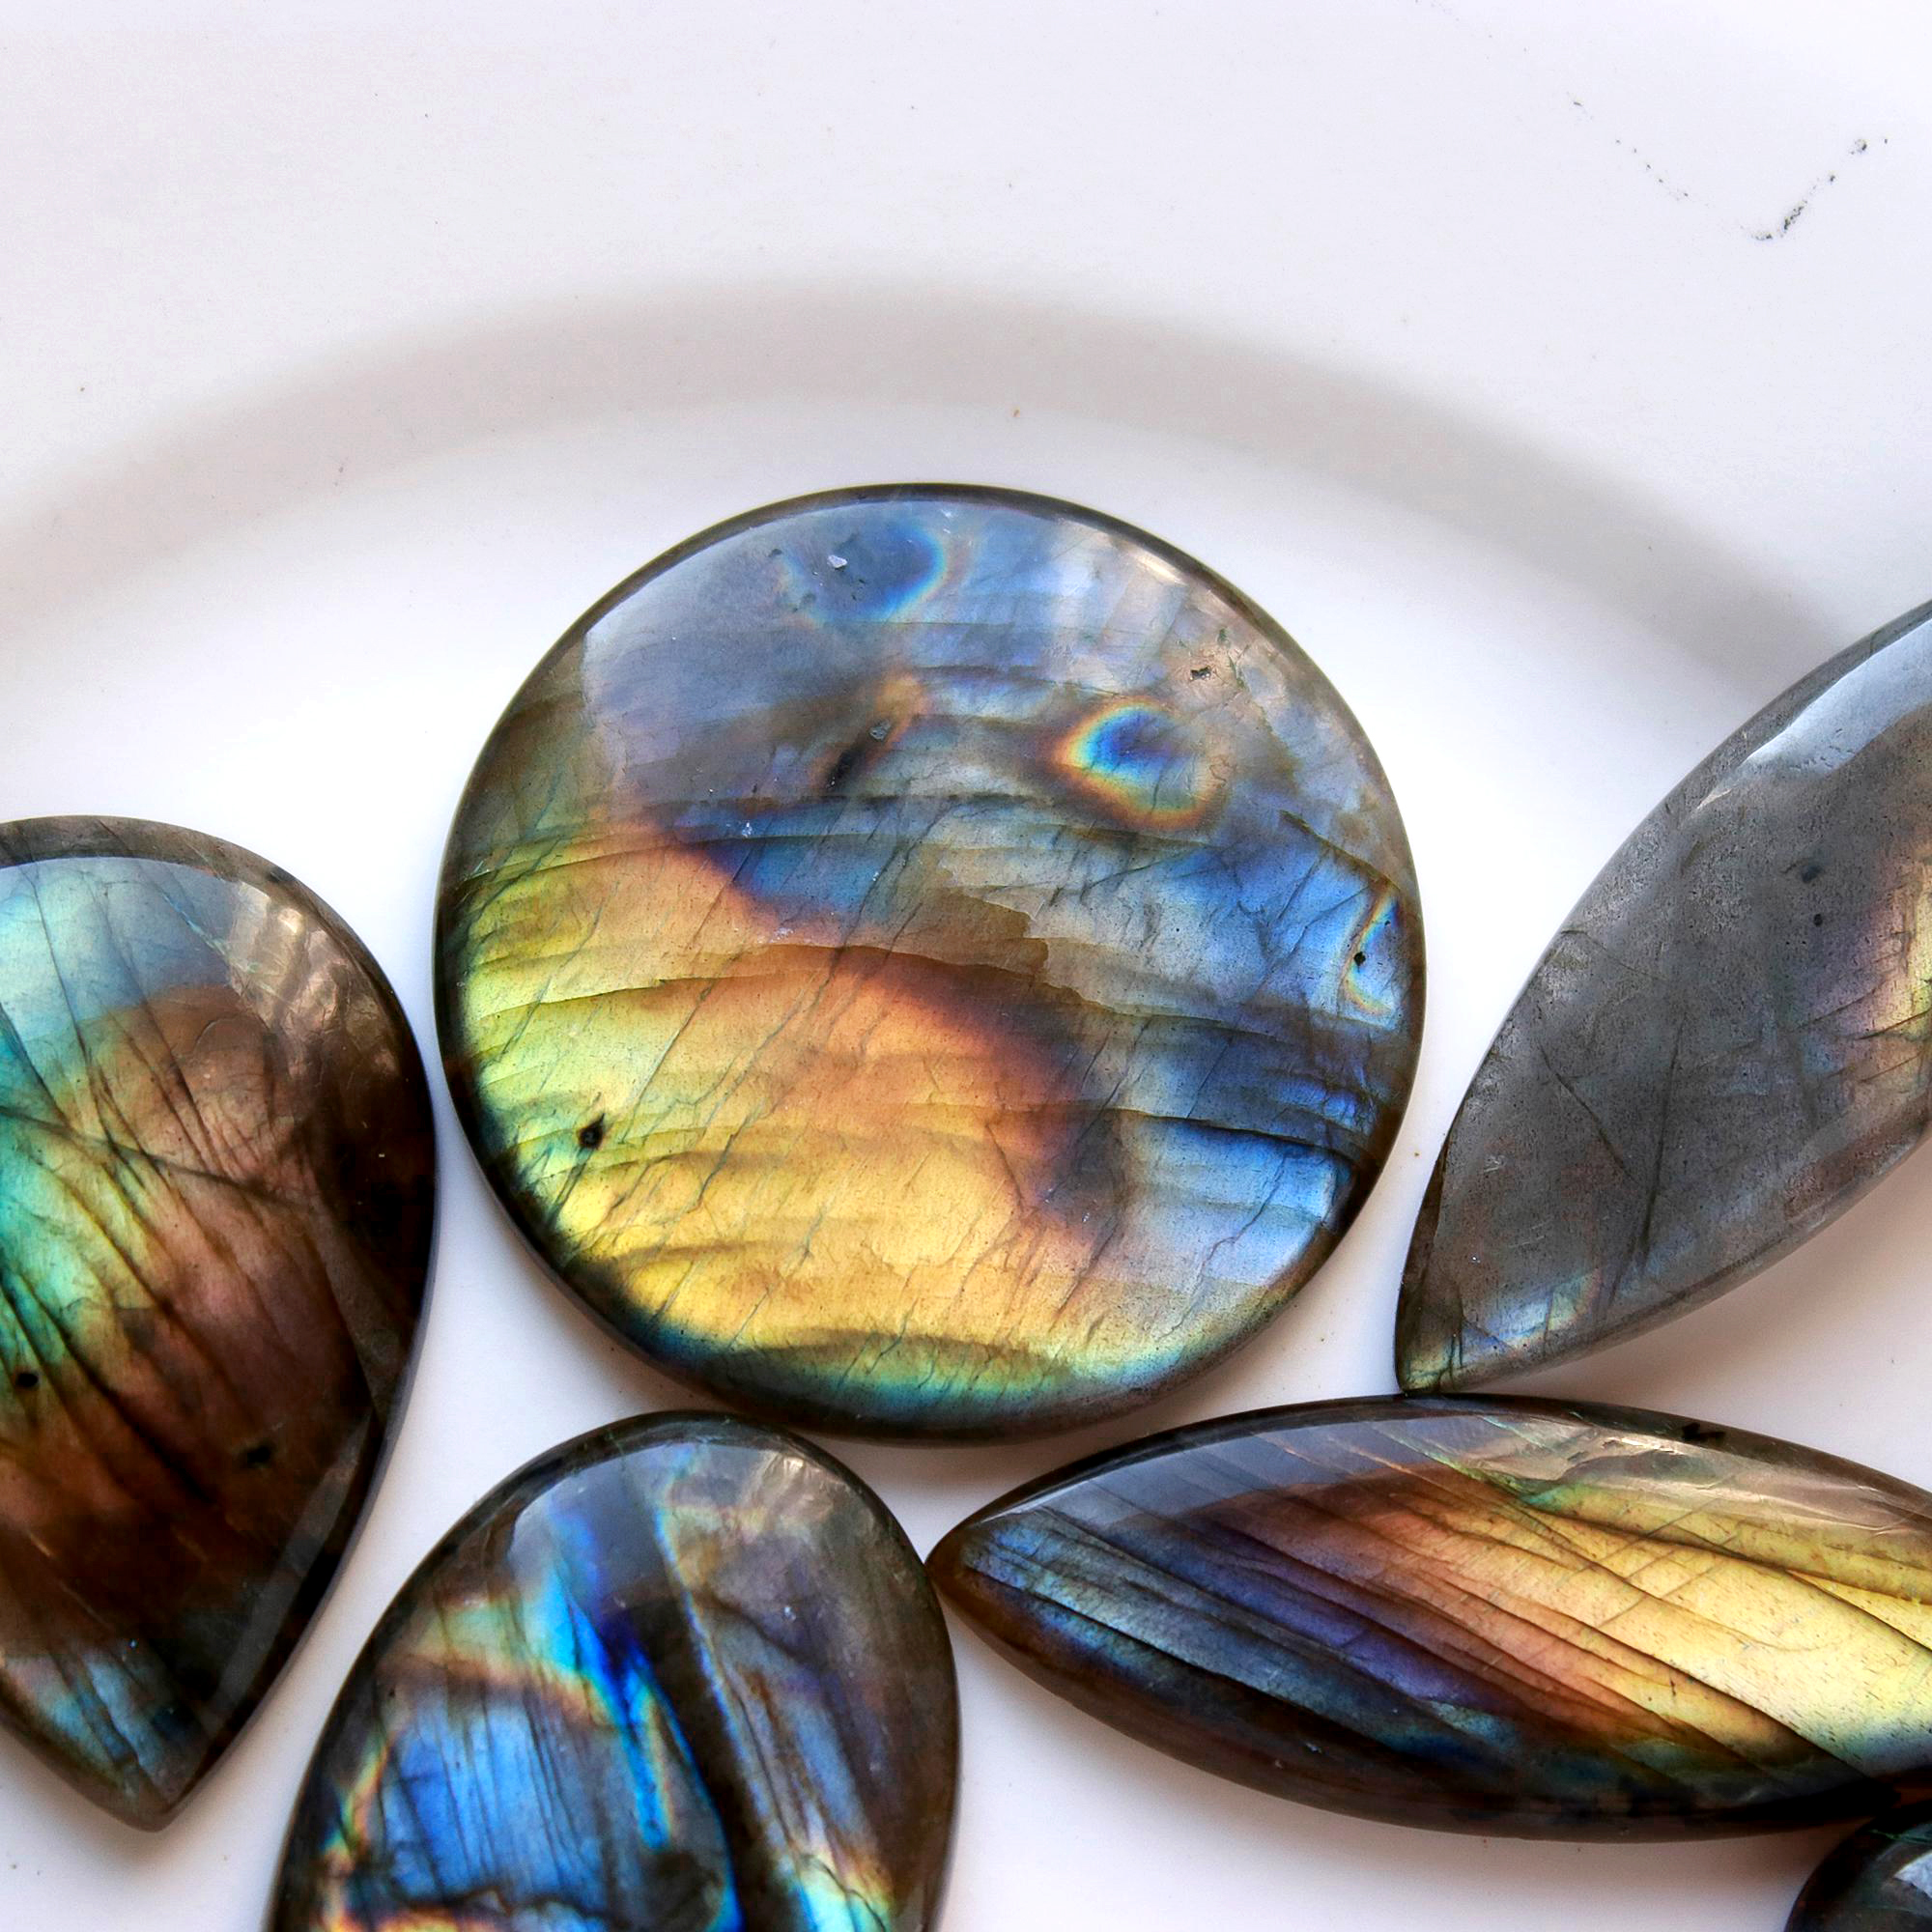 7 Pcs.397 Cts Natural labradorite Cabochon Loose Gemstone For Jewelry Wholesale Lot Size 50x17 29x35mm#1110